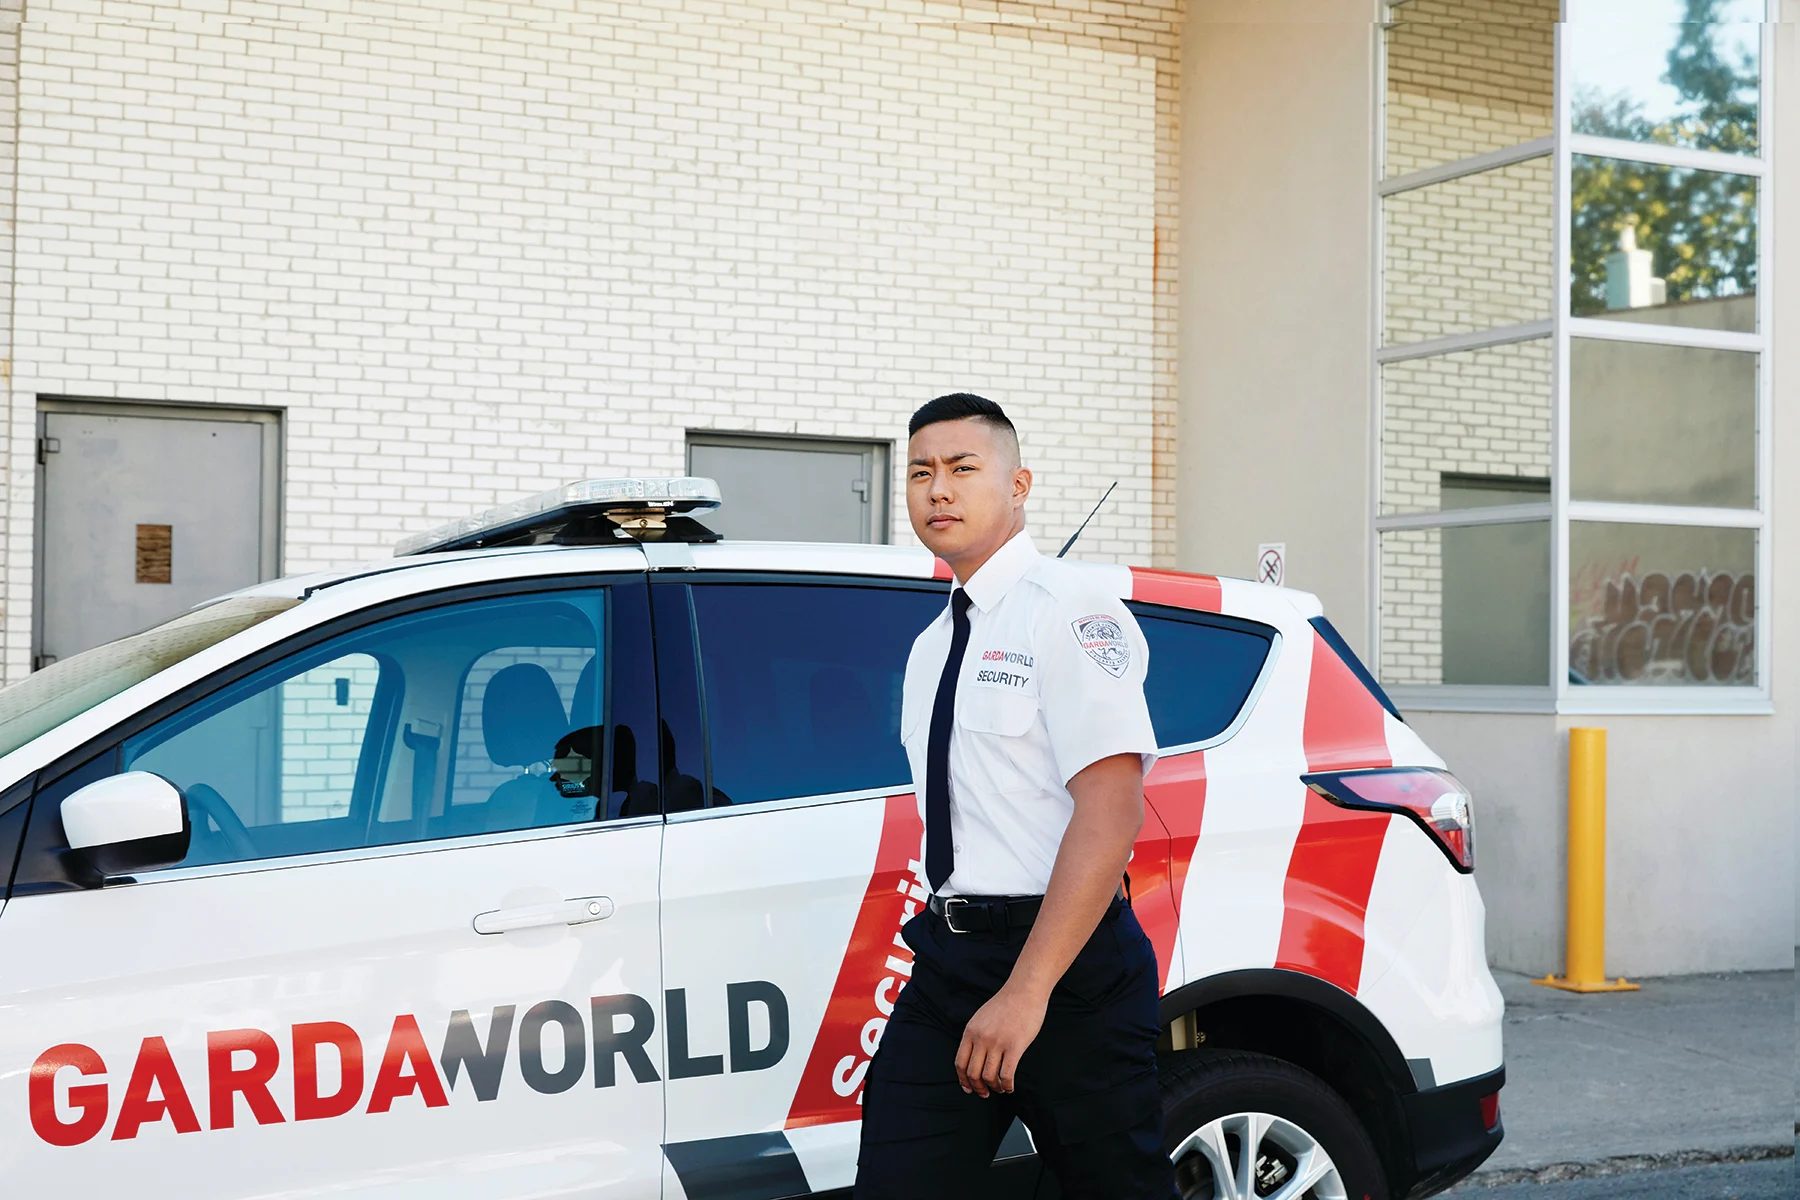 GardaWorld Security improves safety at scale to reduce speeding by 74%